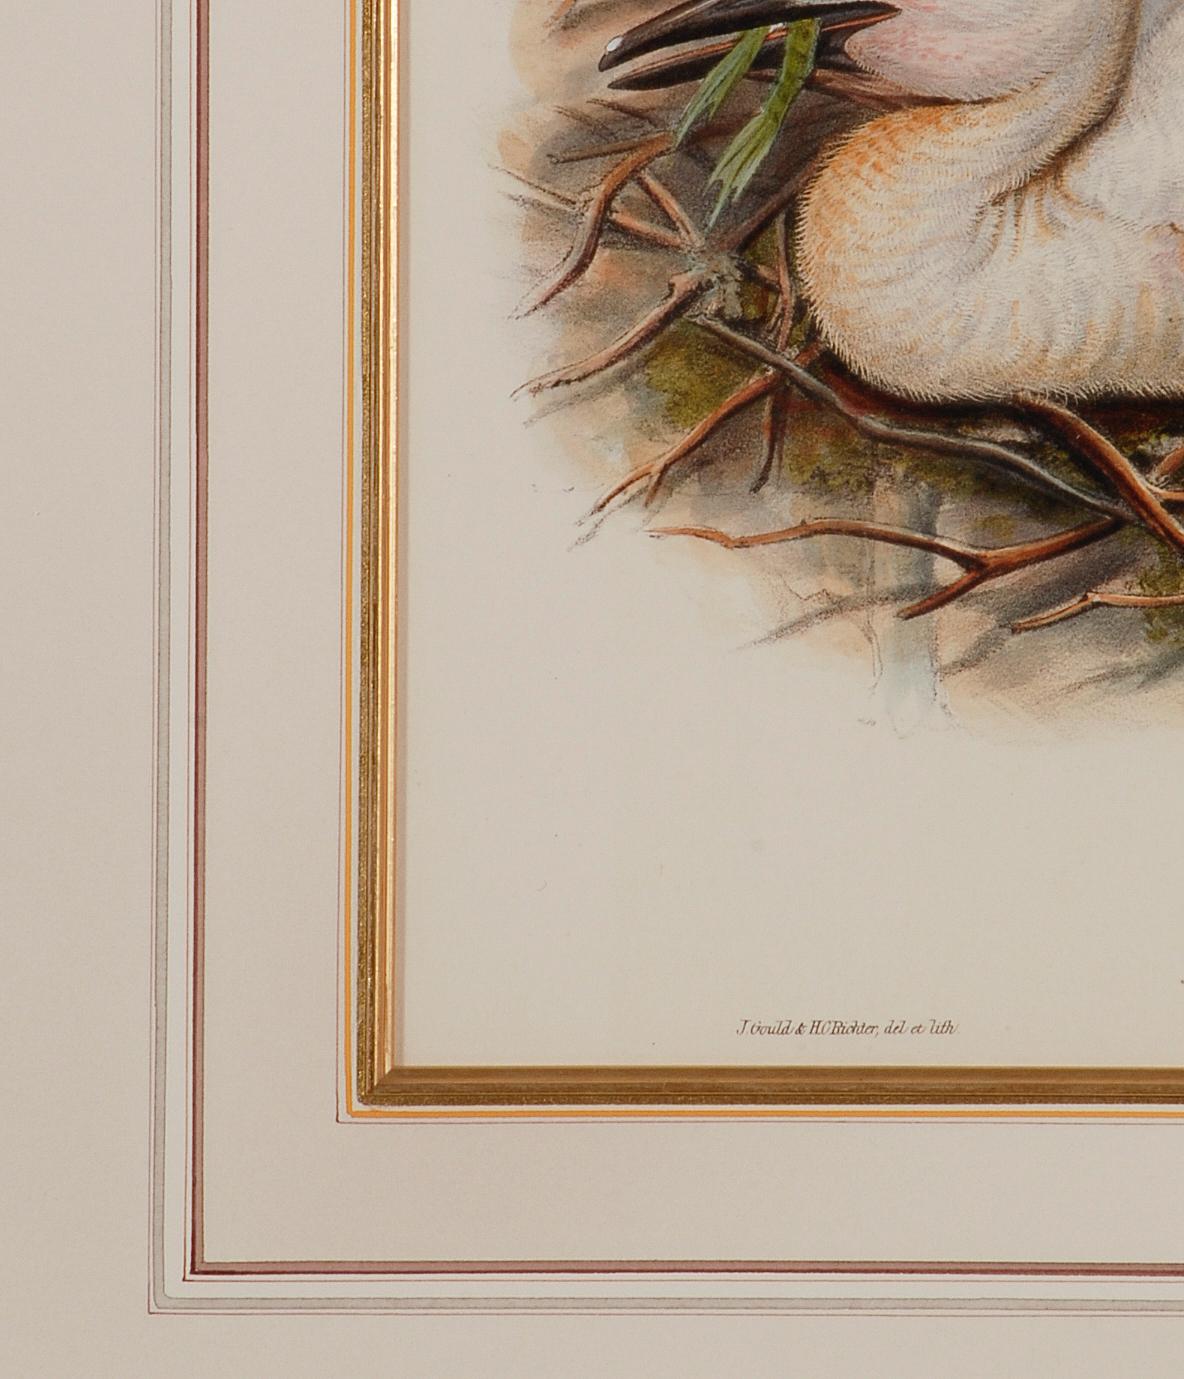 Stork Family: A Framed Original 19th C. Hand-colored Lithograph by Gould - Naturalistic Print by John Gould and Henry Constantine Richter